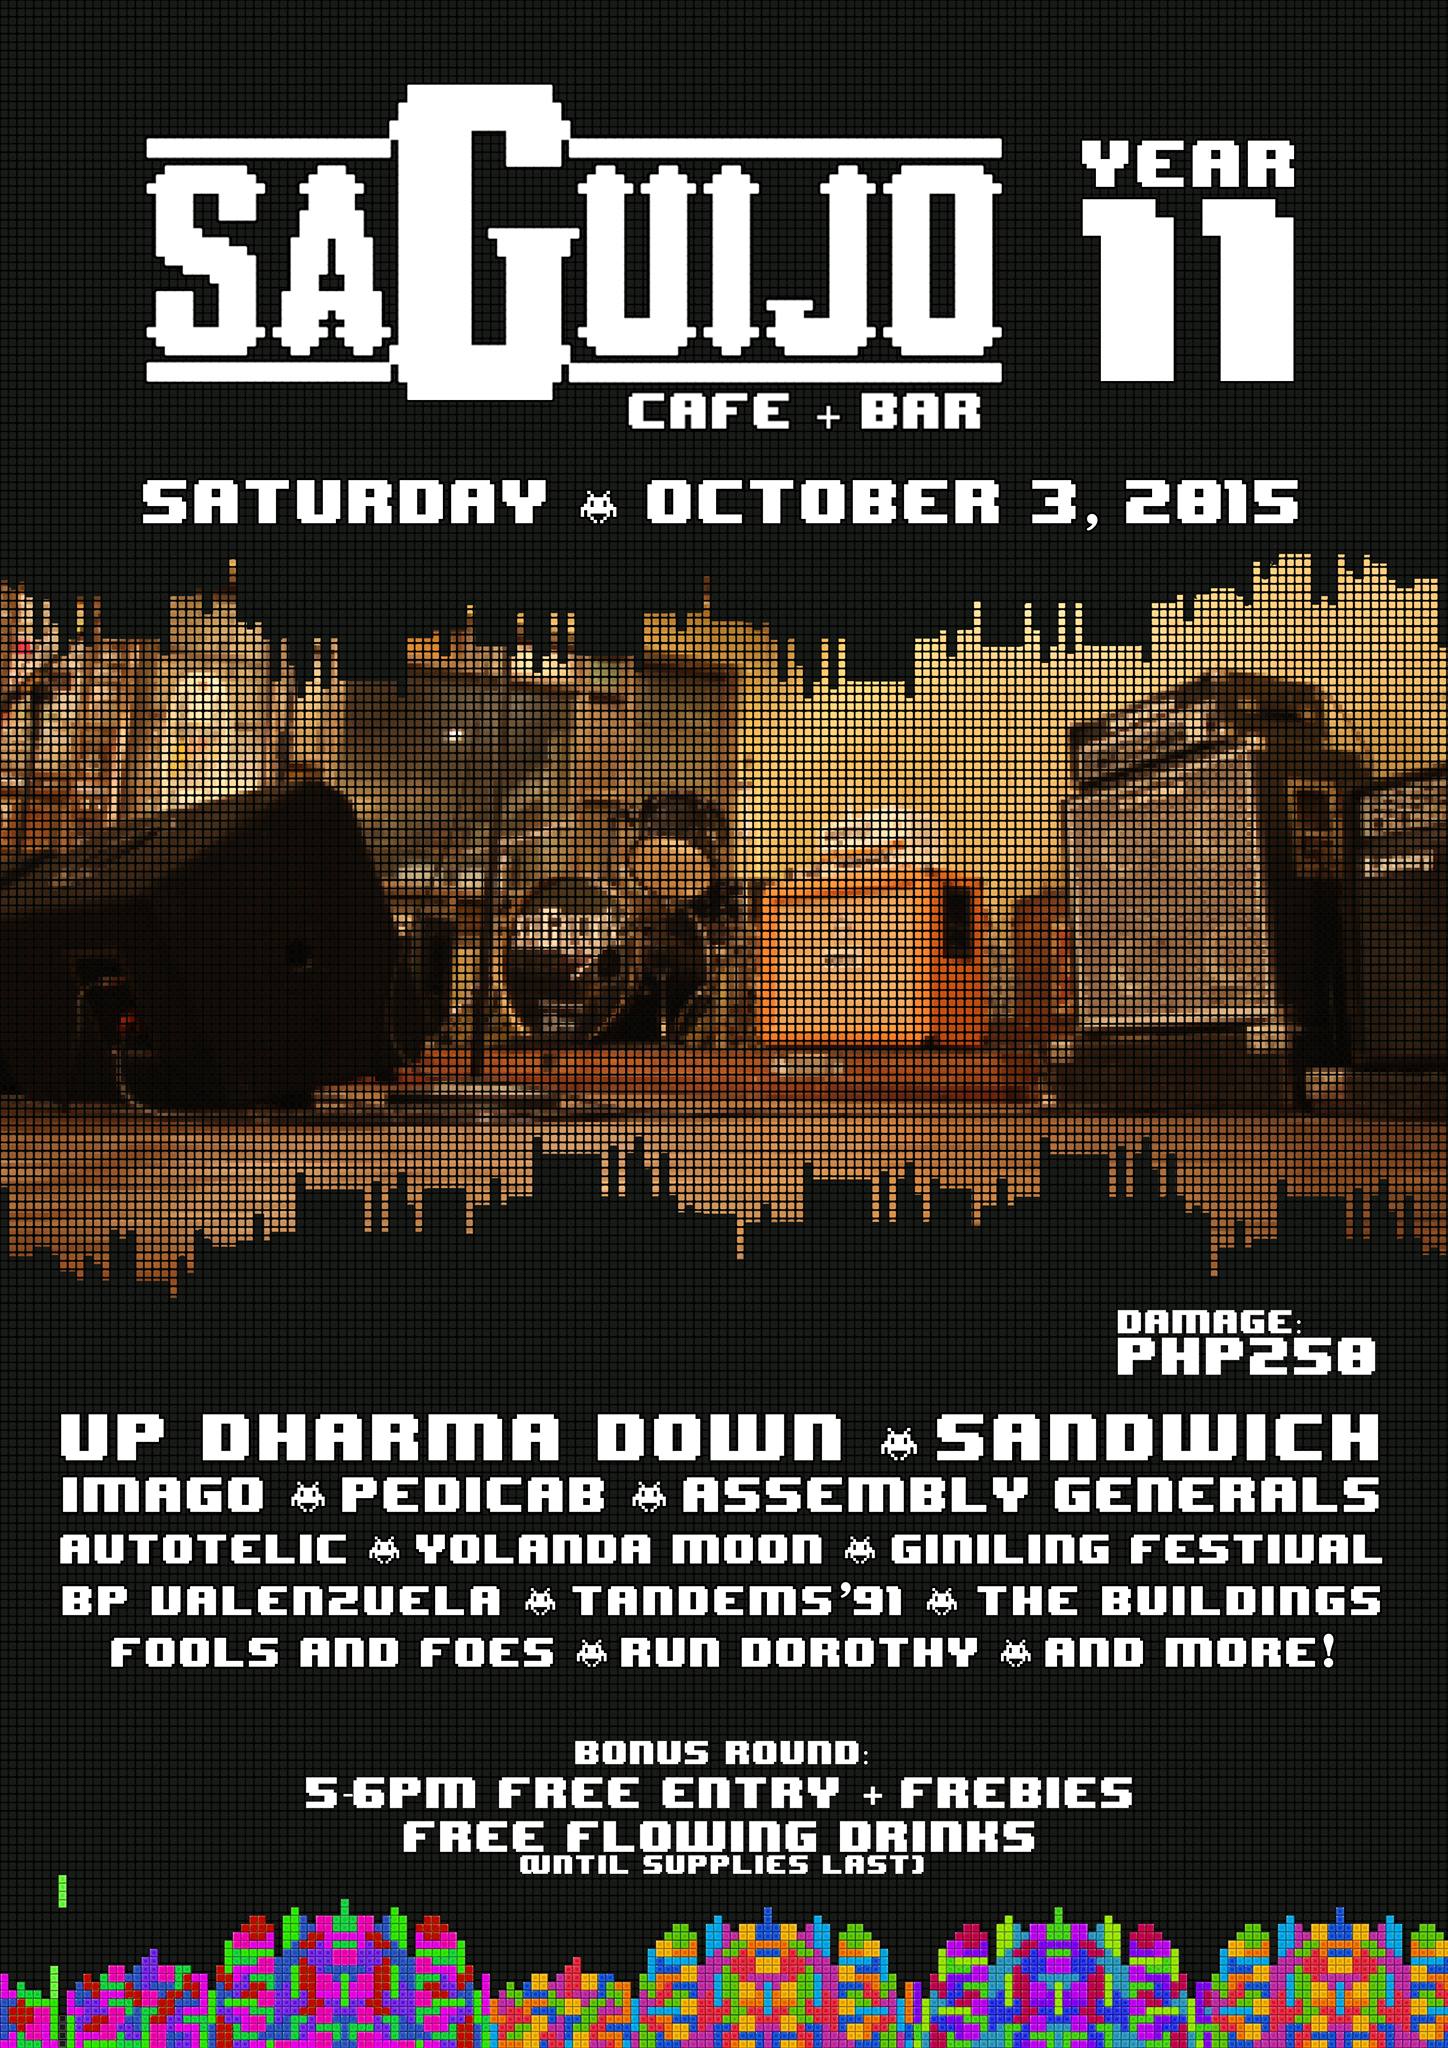 SAGUIJO'S 11TH ANNIVERSARY! - Oct3 Saturday, October 3 at 9:00pm - 12:00am Oct 3 at 9:00pm to Oct 4 at 12:00am Show Map saGuijo Cafe + Bar Events 7612 Guijo Street, San Antonio Village, 1203 Makati, Philippines Find Tickets Tickets Available www.saguijo.com Invited by Cris O Ramos Jr Oct3@Saguijo Saguijo 11 Years w/ ASSEMBLY GENERALS AUTOTELIC BP VALENZUELA THE BUILDINGS OH, FLAMINGO! FOOLS AND FOES GINILING FESTIVAL IMAGO PEDICAB RUN DOROTHY SANDWICH TANDEMS'91 UP DHARMA DOWN VERONICA & I YOLANDA MOON. And some more to come!!! 5-6PM FREE ENTRANCE. open bar while supplies last. Show starts 6PM SHARP P250 Entrance. www.saguijo.com :))))) STAY TUNED FOR UPDATES!